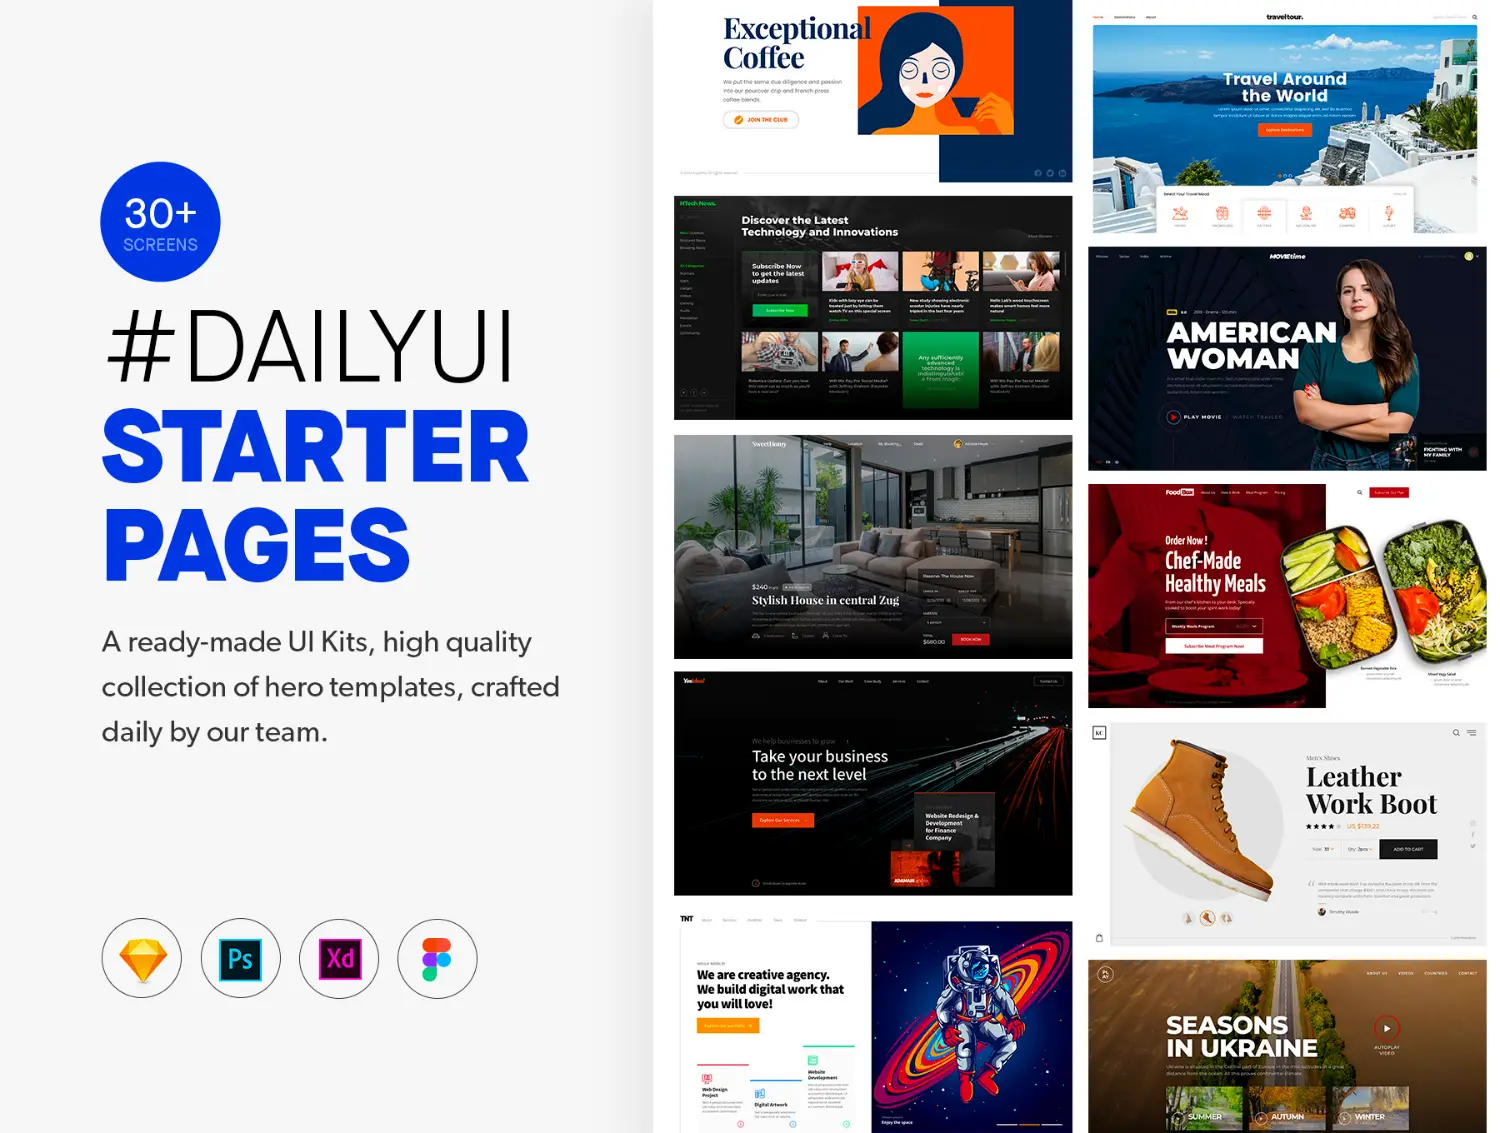 [VIP] Daily UI Starter Pages: A ready-made UI Kits